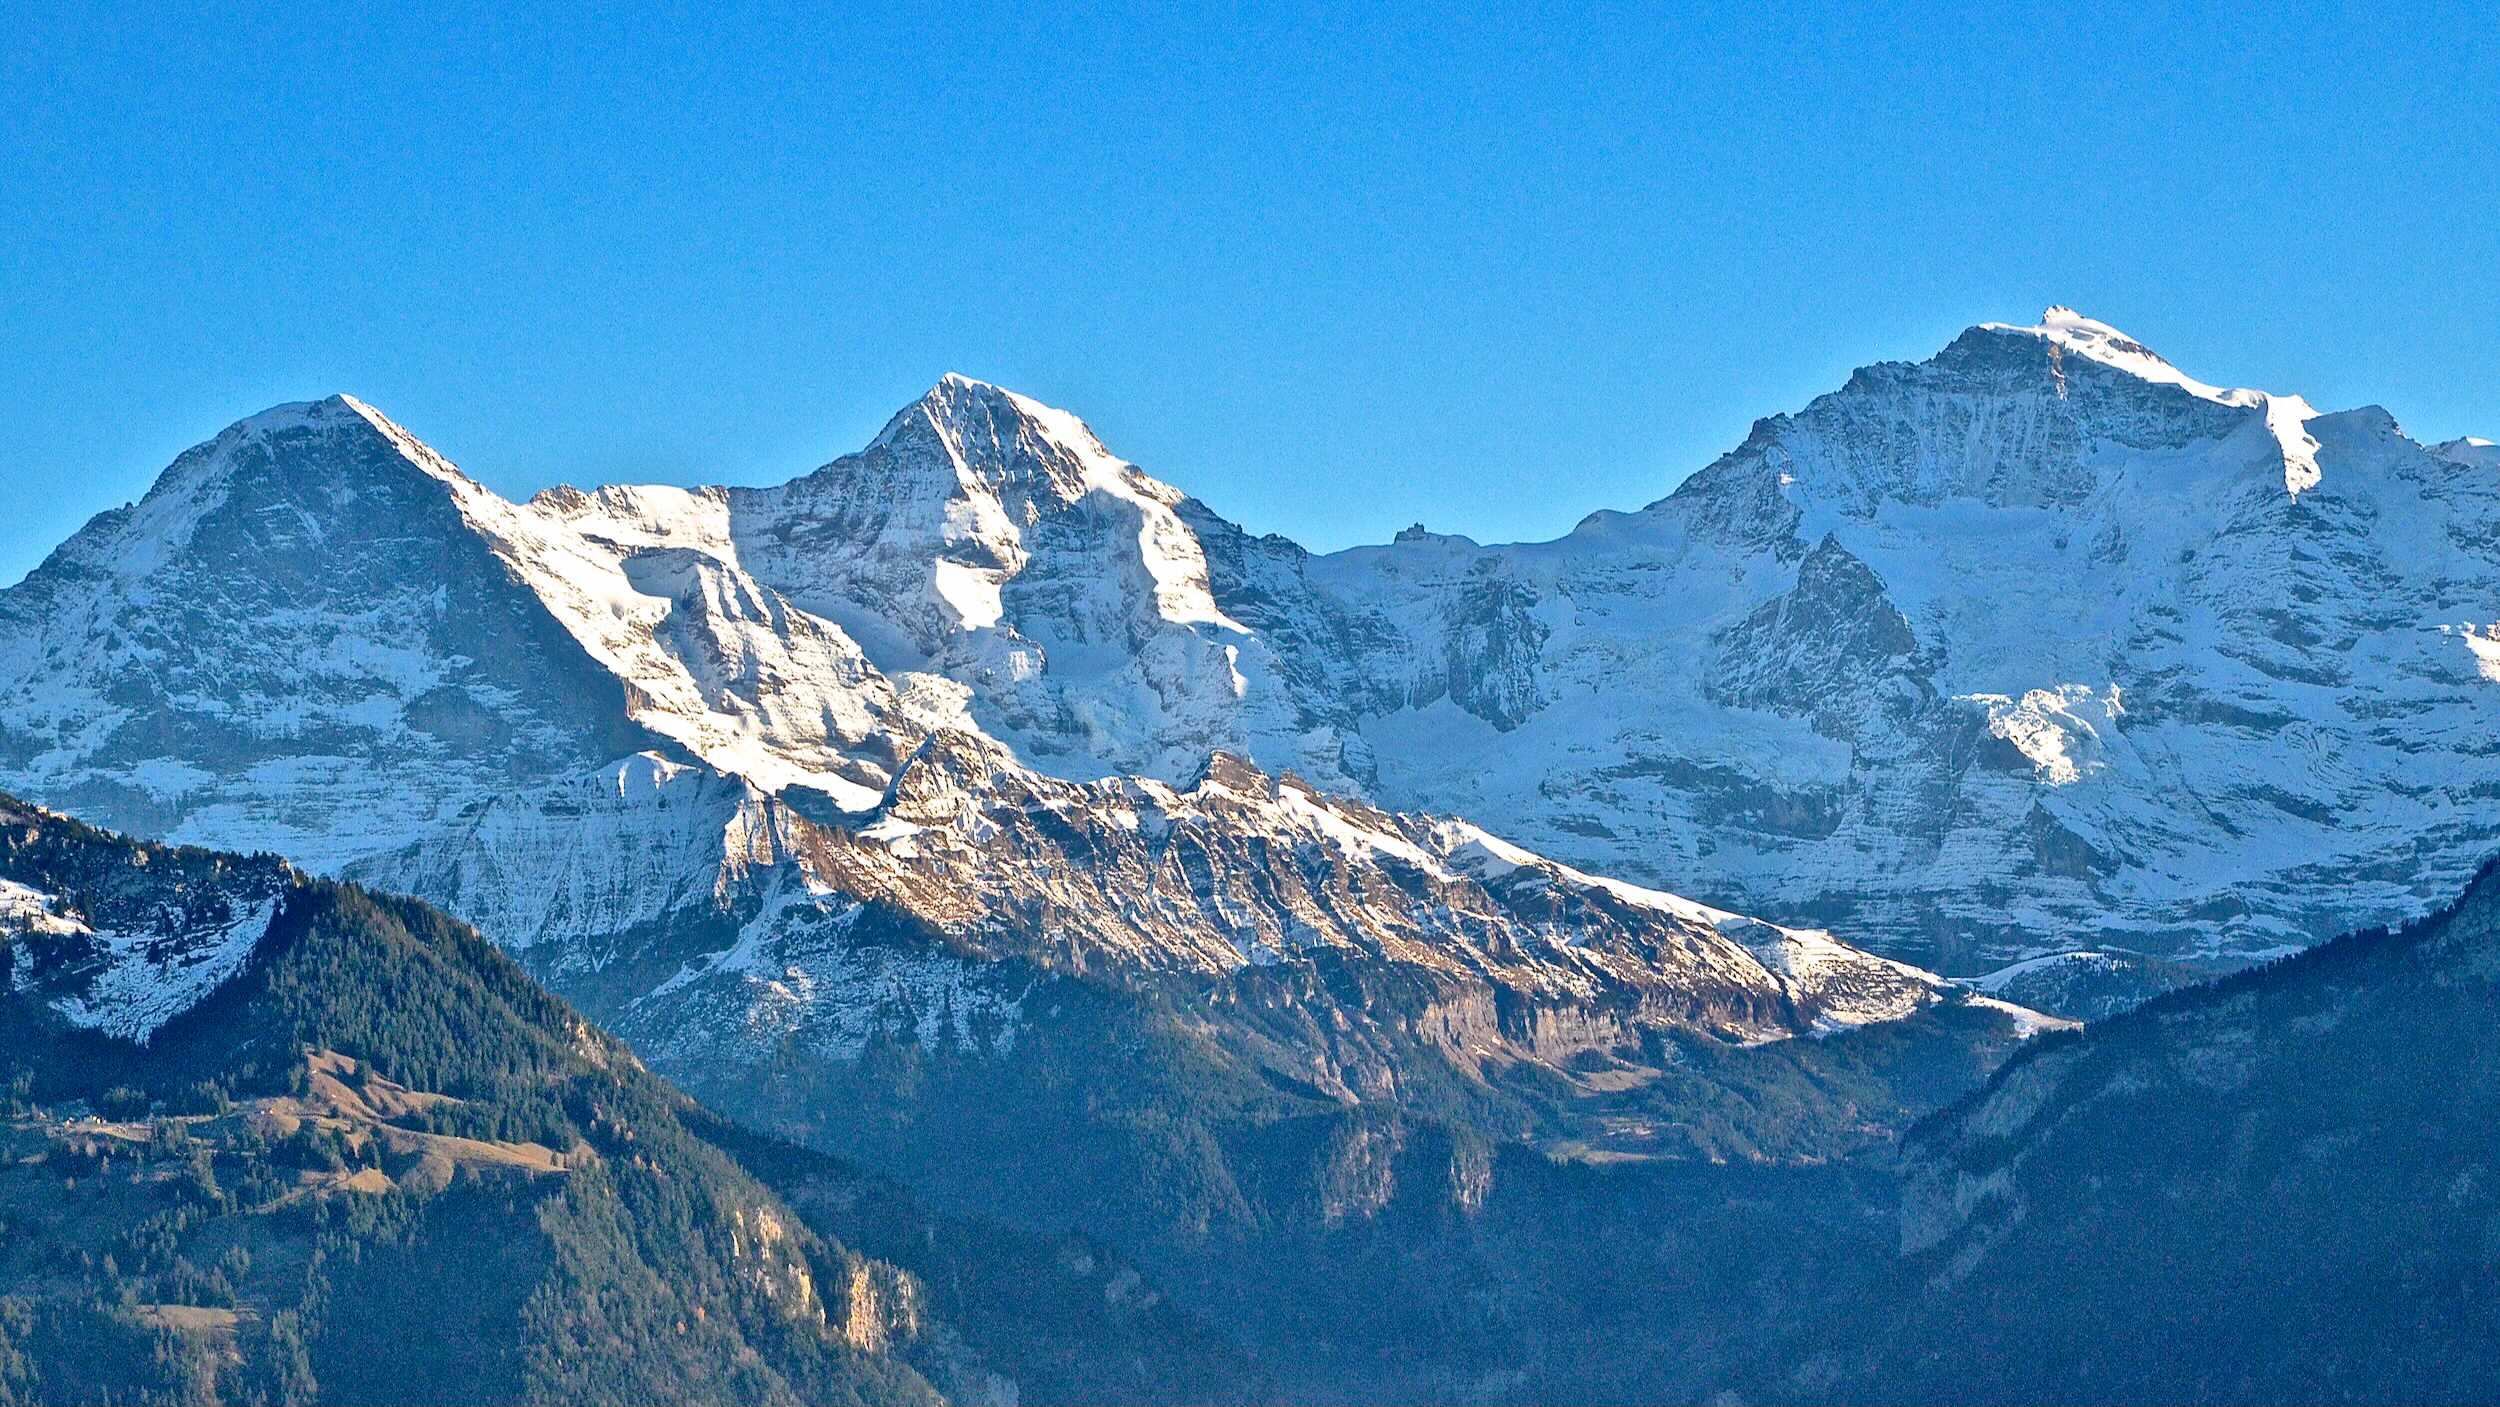 2-Day Bollywood Tour in Switzerland - Customised Private Tours by Erwin Tours of Switzerland